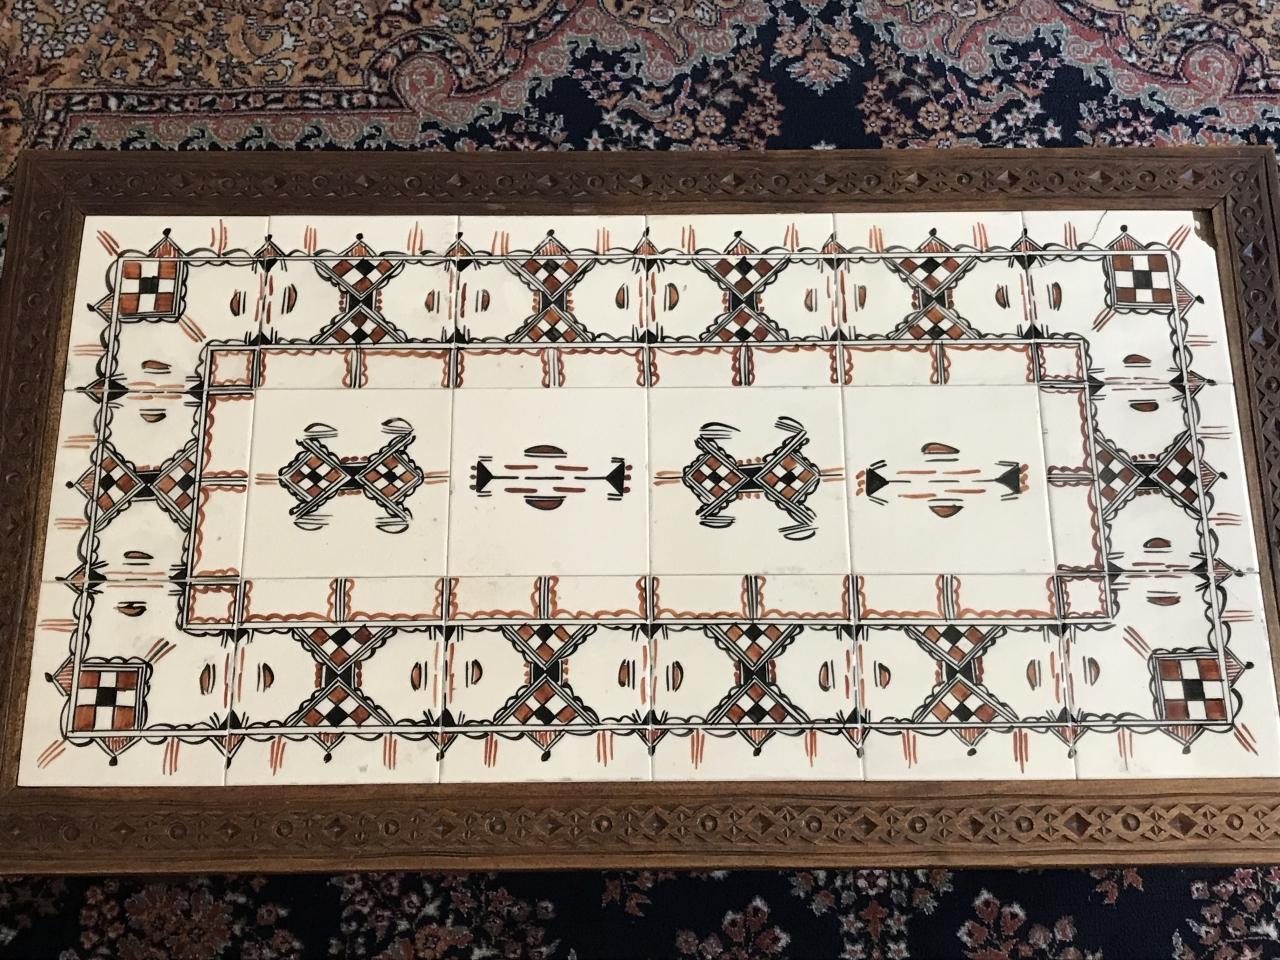 Antique authentic Middle-Eastern coffee table